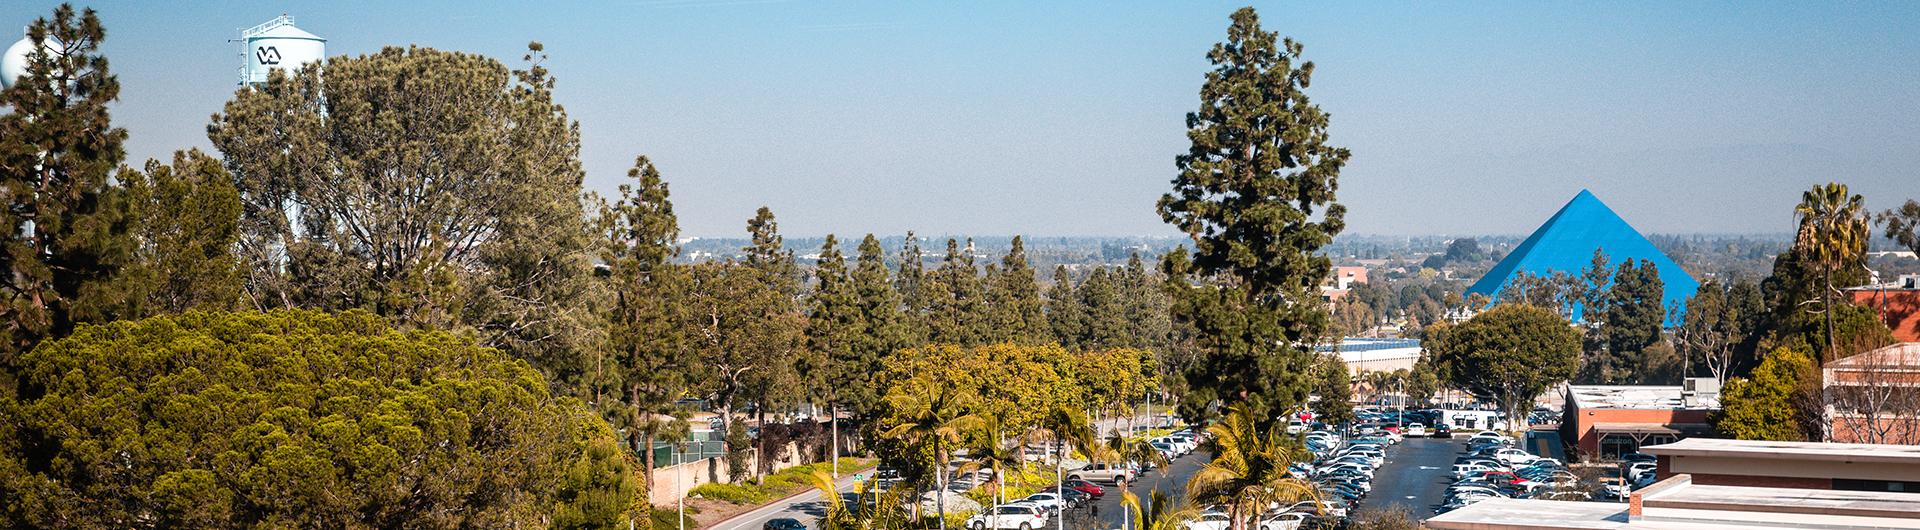 CSULB View of Campus